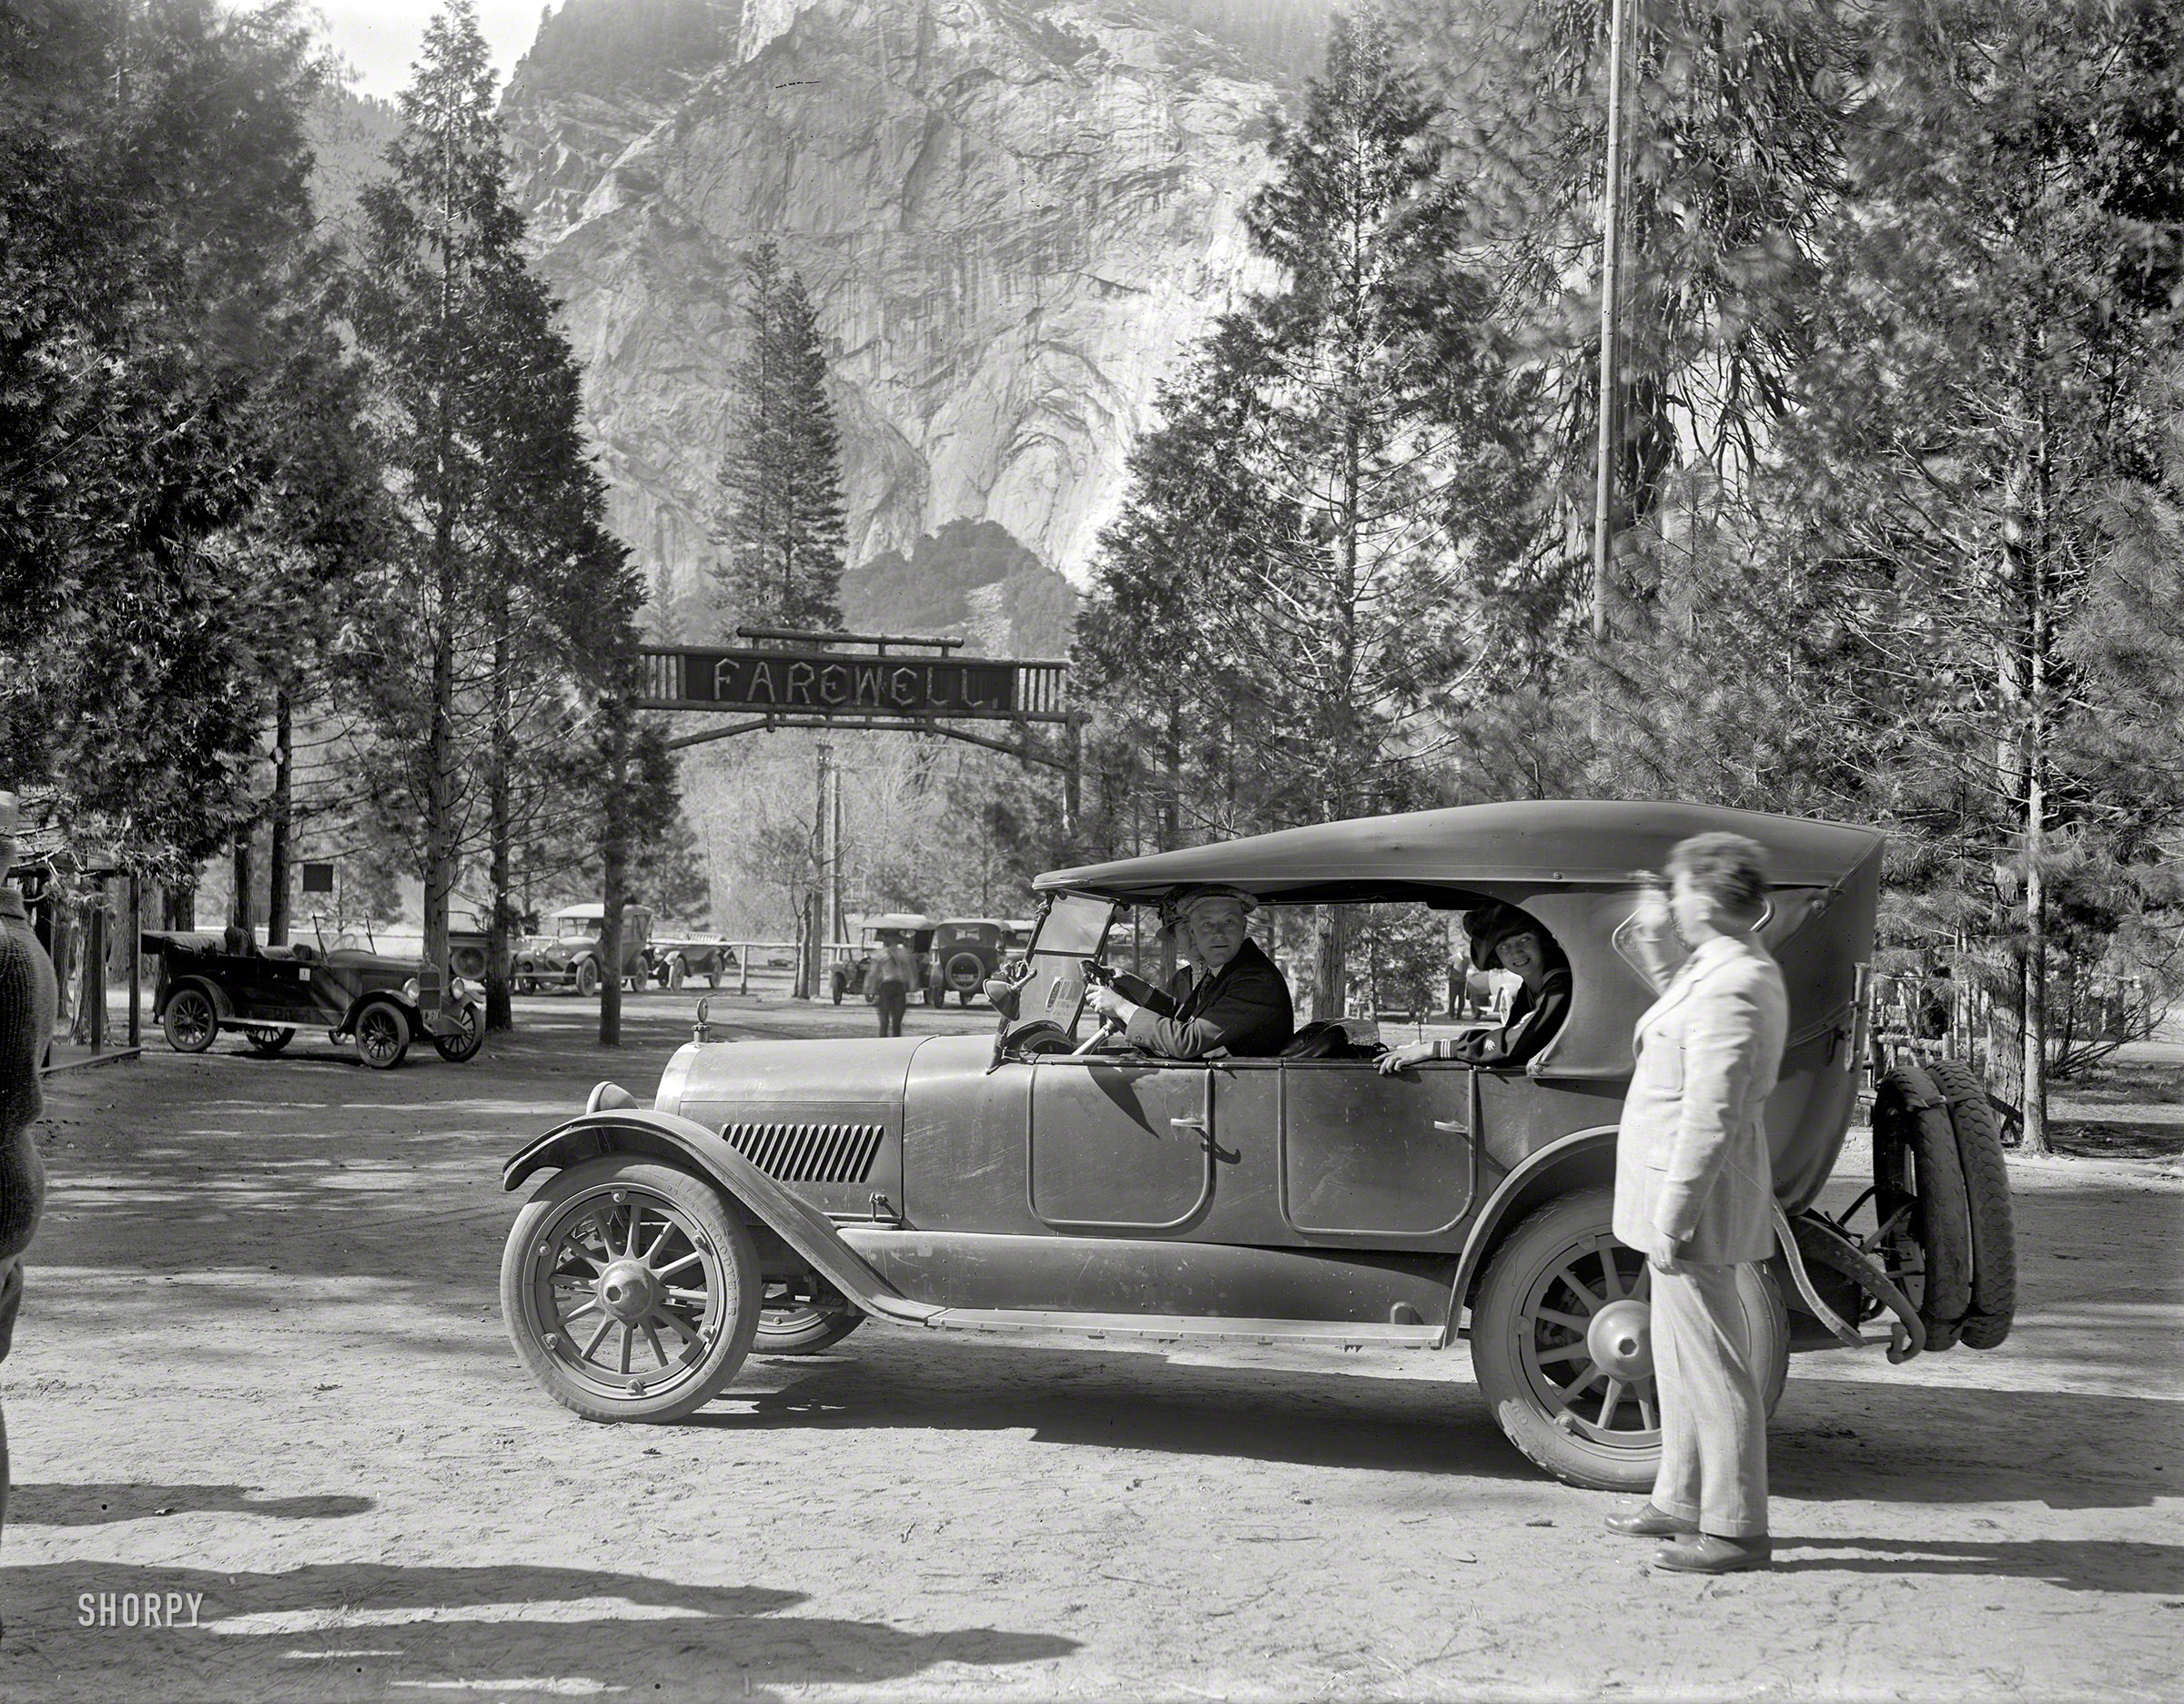 Northern California circa 1920. "Touring car at Yosemite National Park." Our second look at the FAREWELL sign, but with a different car. 6½ x 8½ inch glass negative, originally from the Wyland Stanley collection. View full size.